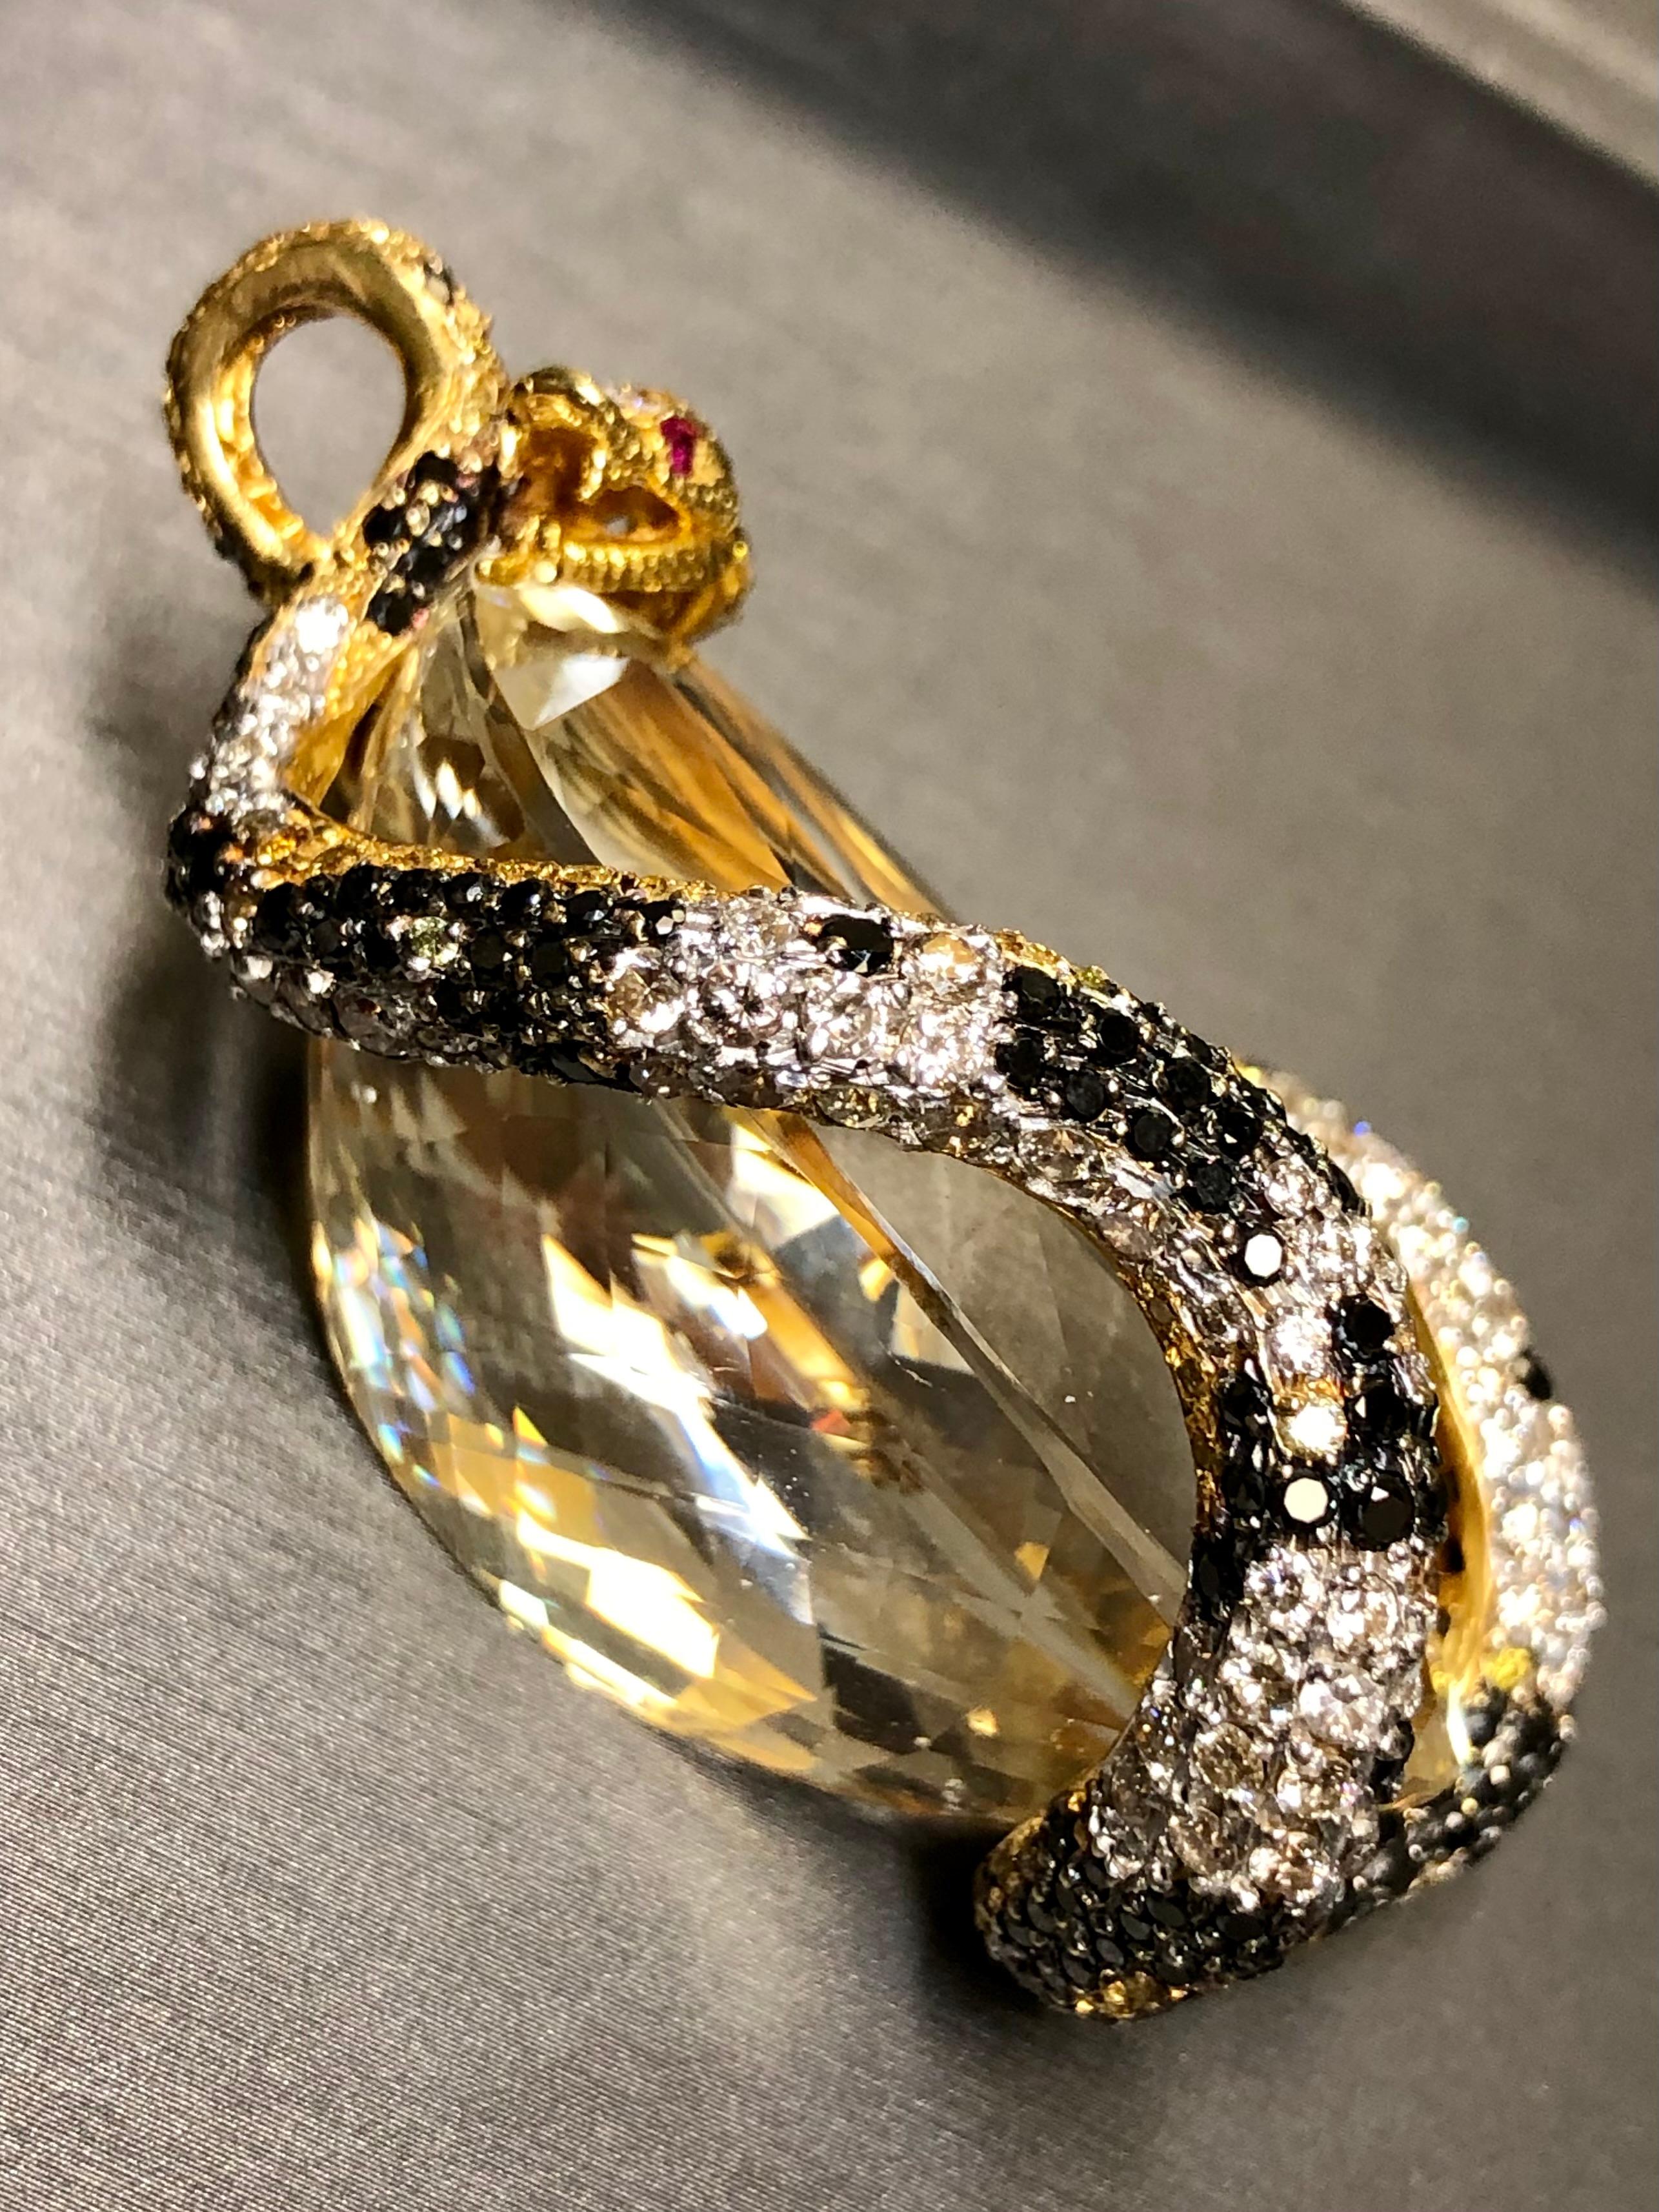 
An incredible piece and the pictures say it all. It has been crafted in 18K yellow gold and set with approximately 9cttw in white, yellow/brown and black diamonds (almost 3cttw of each color). Every centimeter of this serpent that is wrapped around